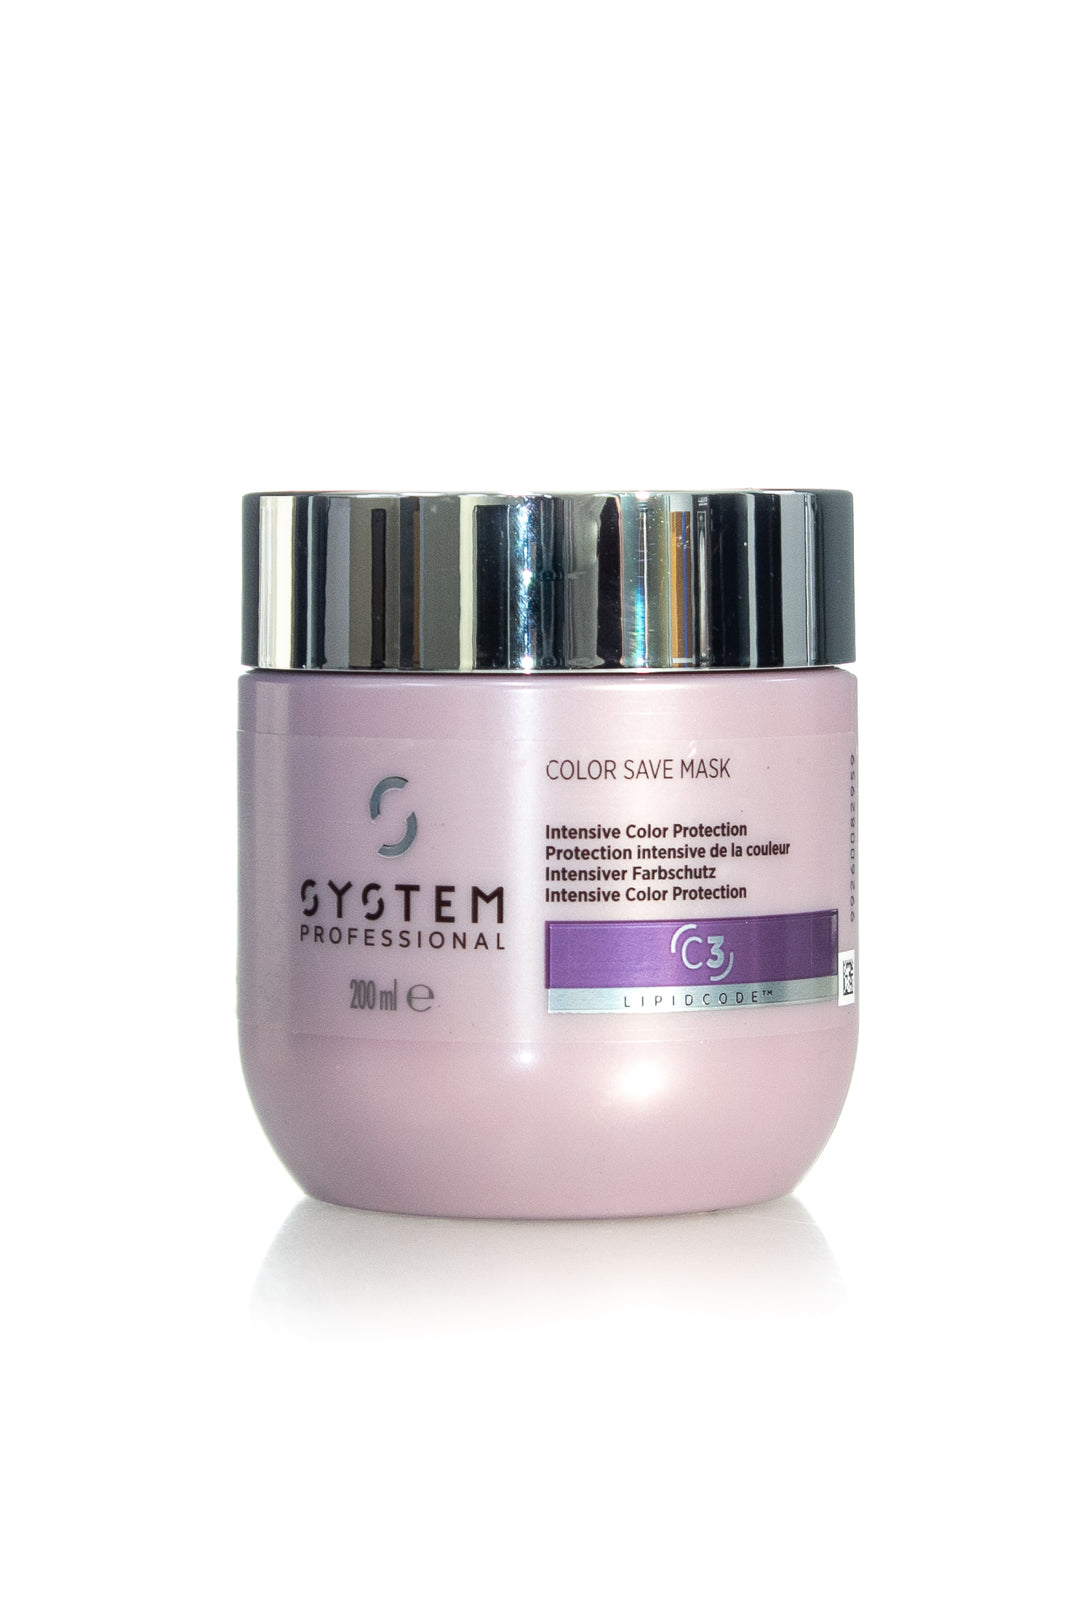 SYSTEM PROFESSIONAL Color Save Mask  | 200ml